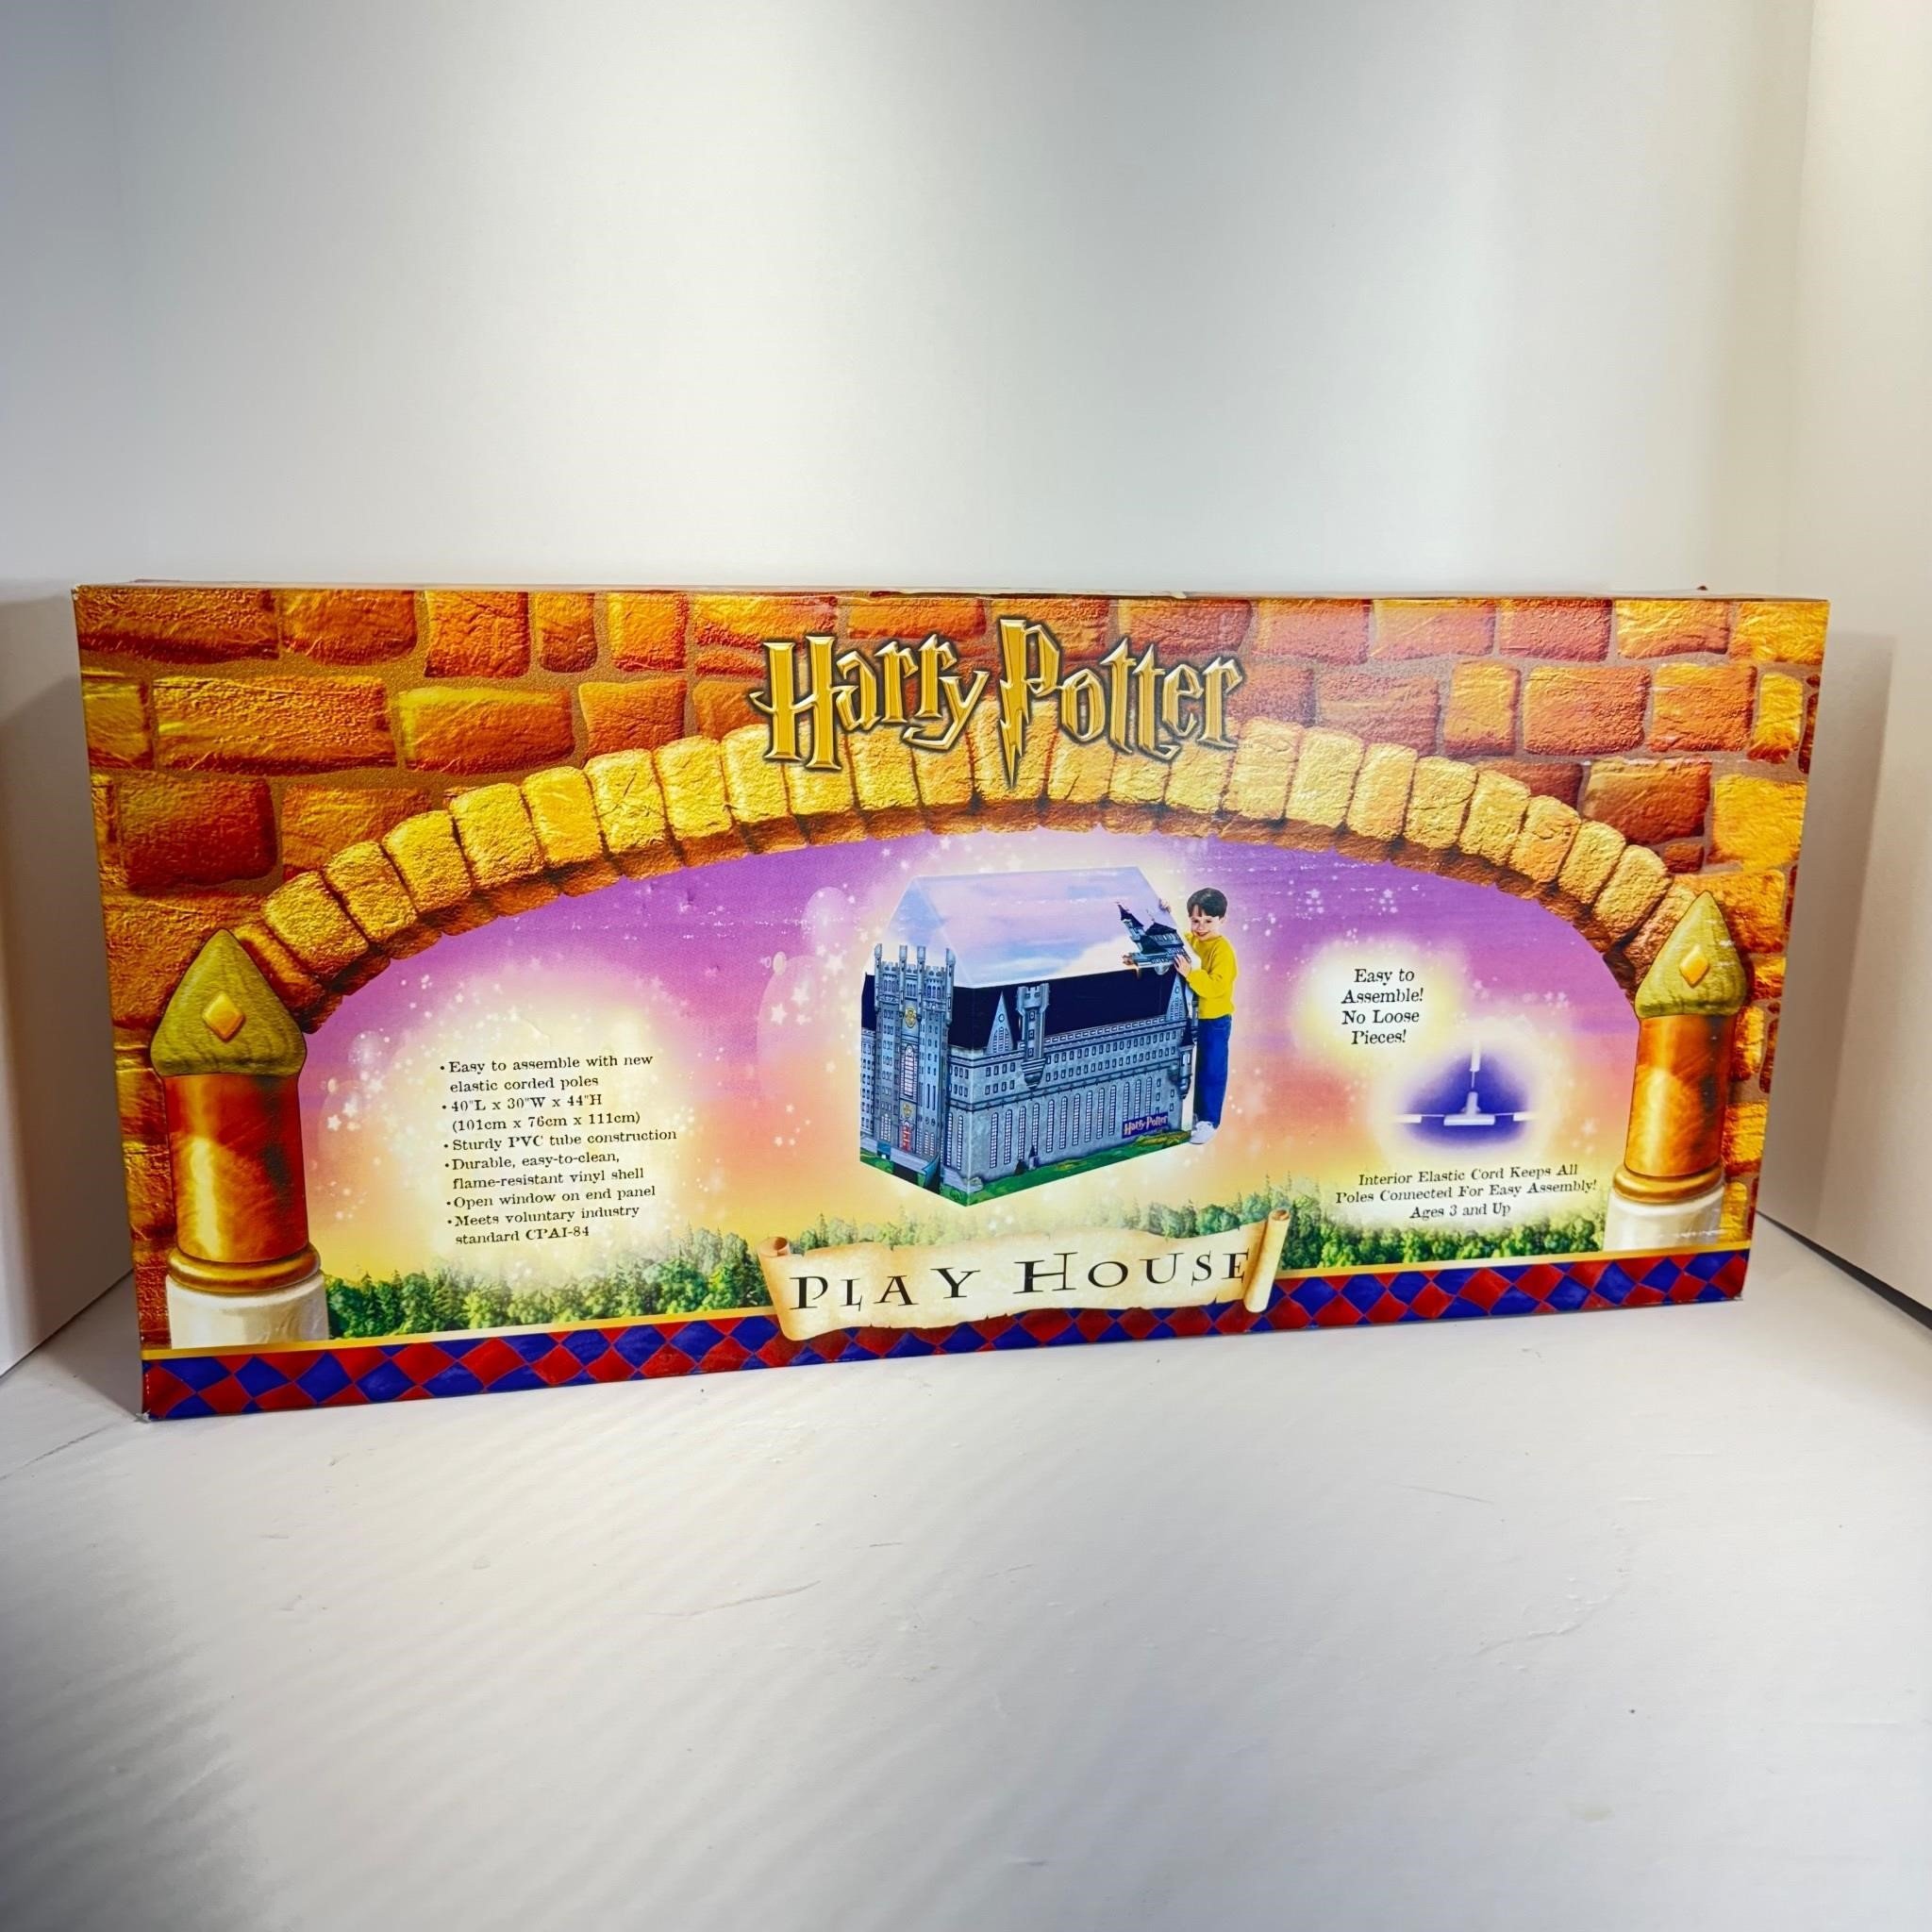 Harry Potter Play House - New in Box